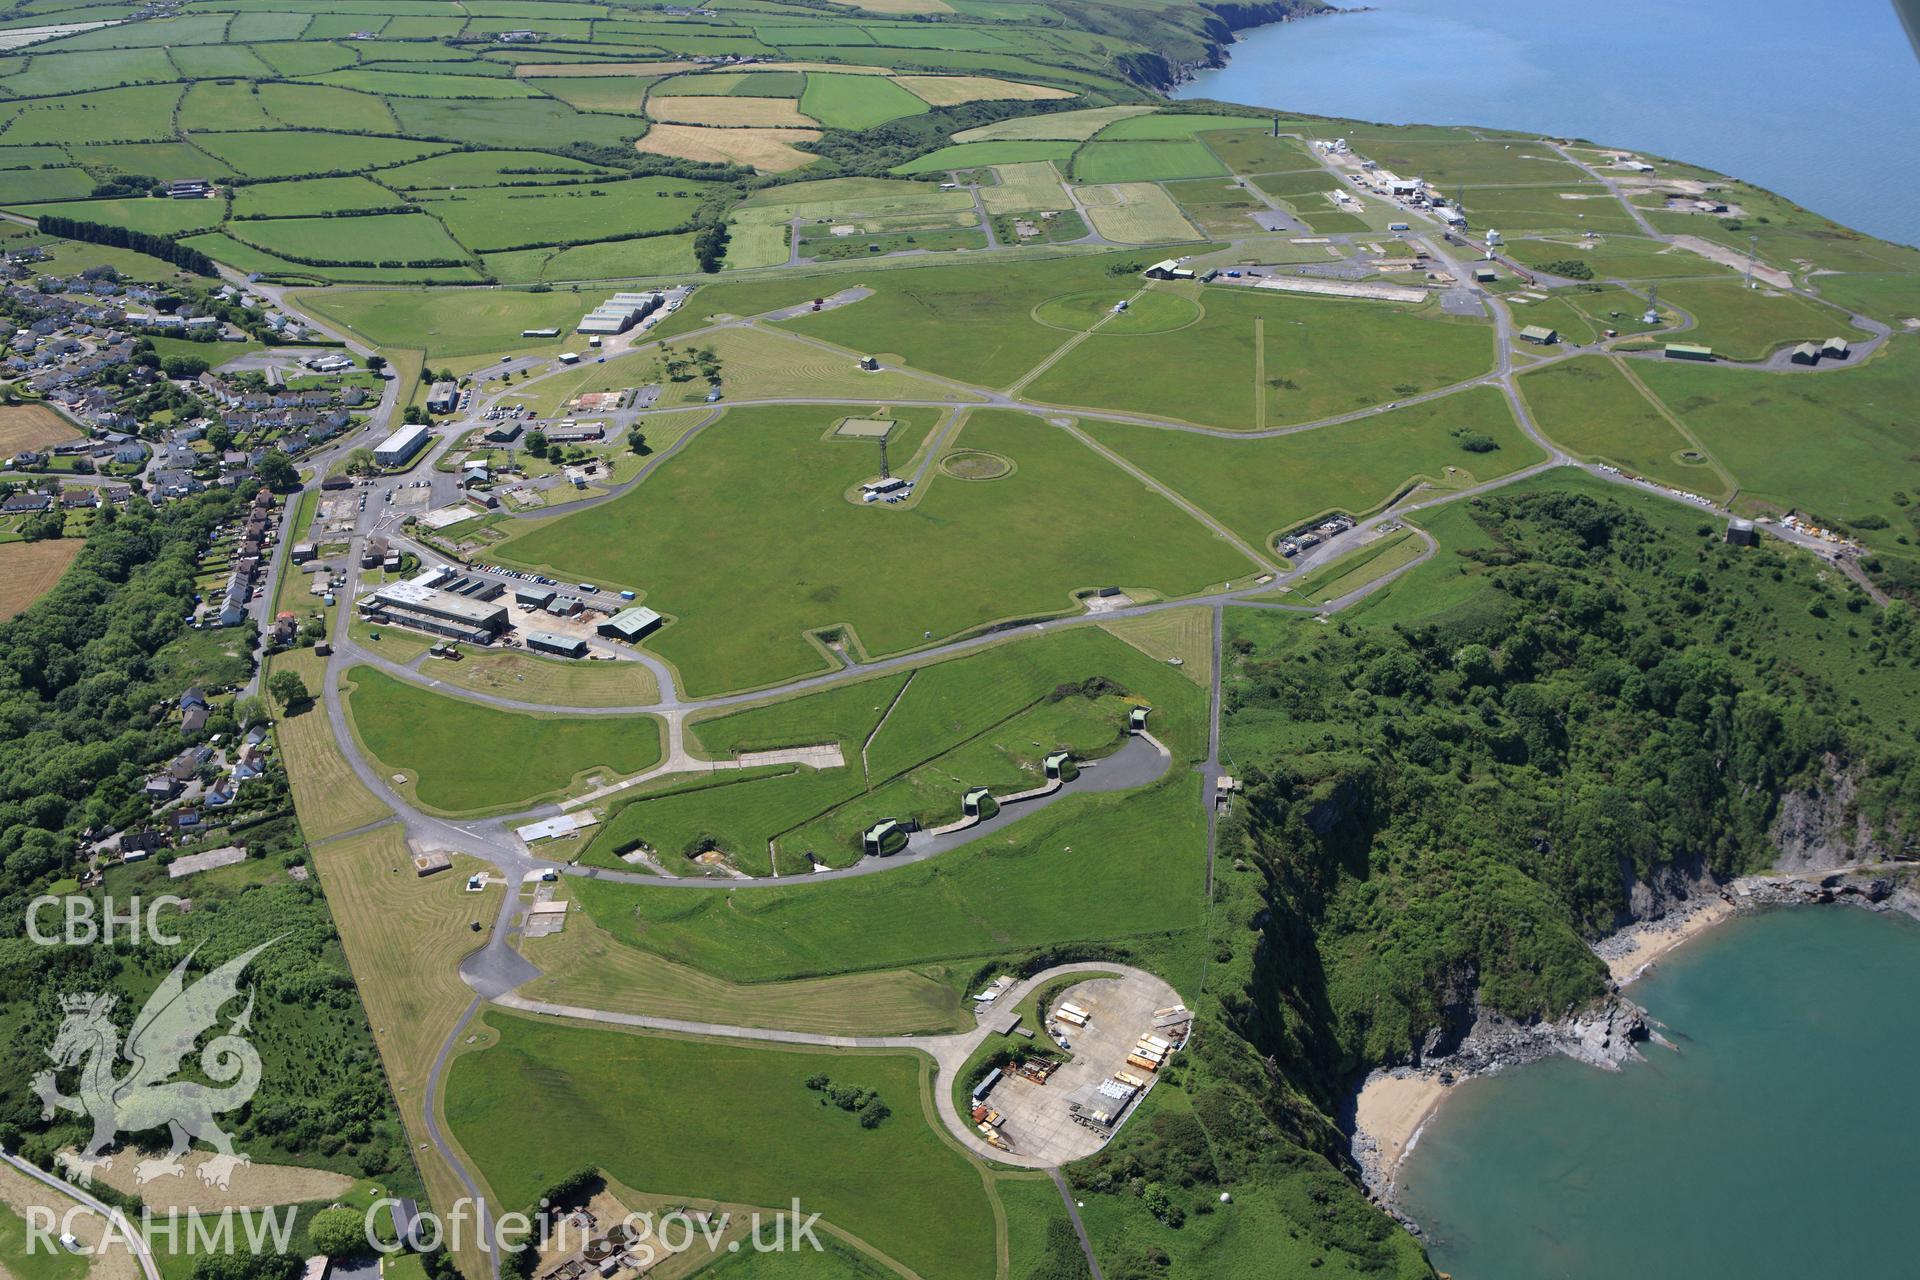 RCAHMW colour oblique aerial photograph of Defence Evaluation and Research Agency, Aberporth. Taken on 01 June 2009 by Toby Driver